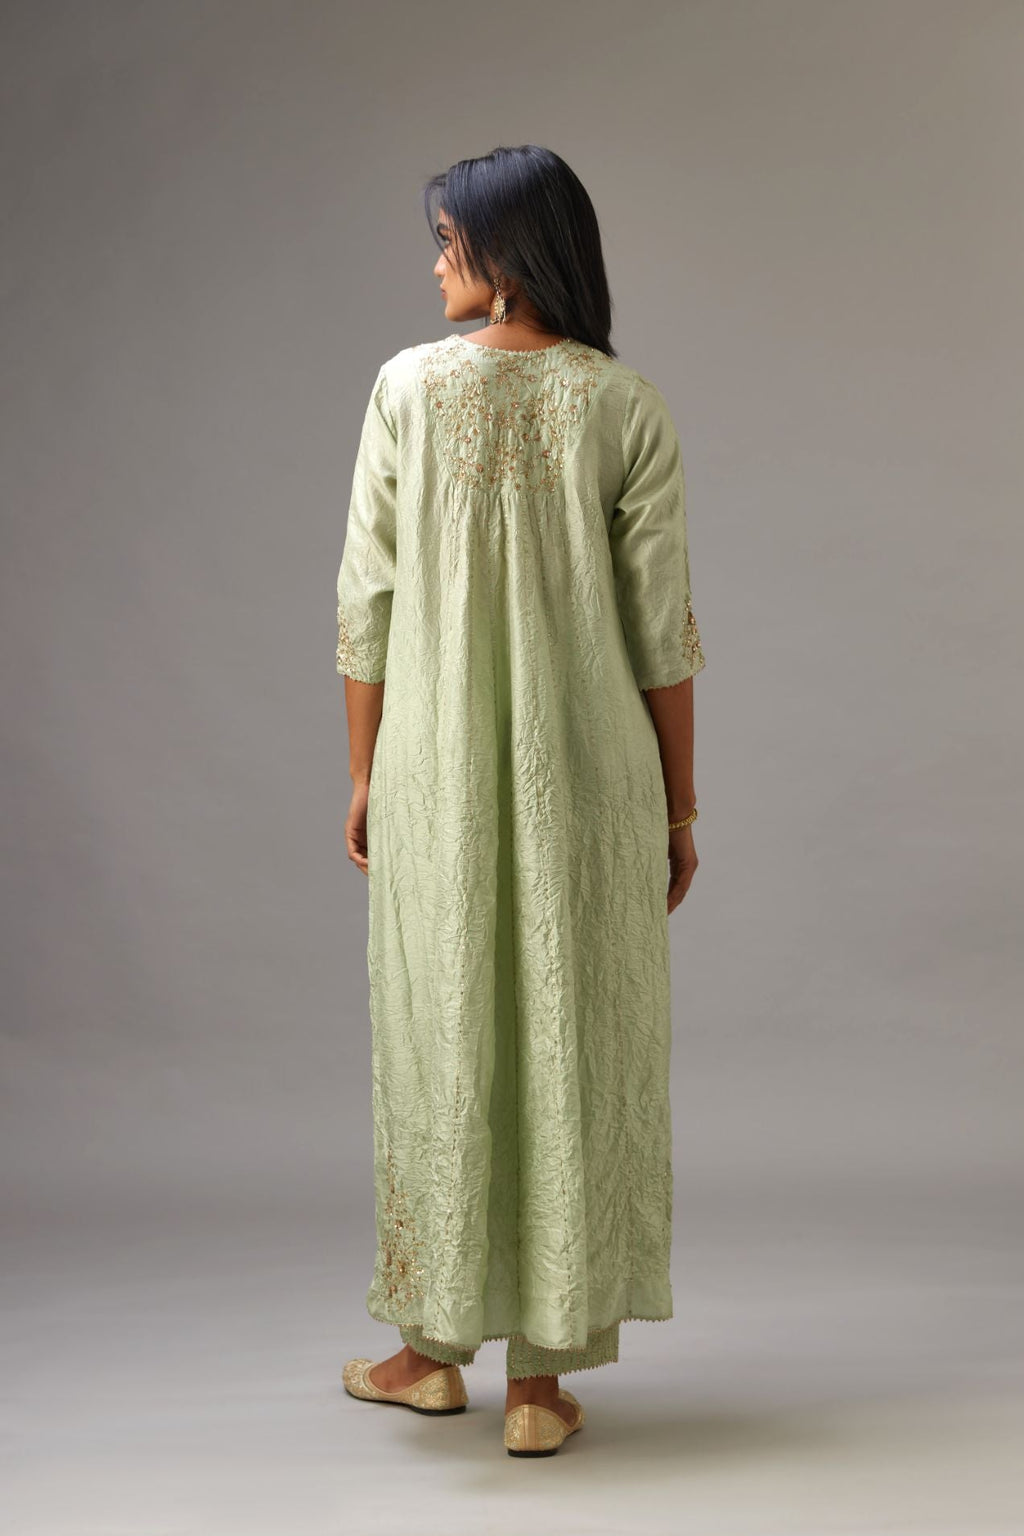 Green hand crushed silk kurta dress with a V neck embroidered yoke and panels.